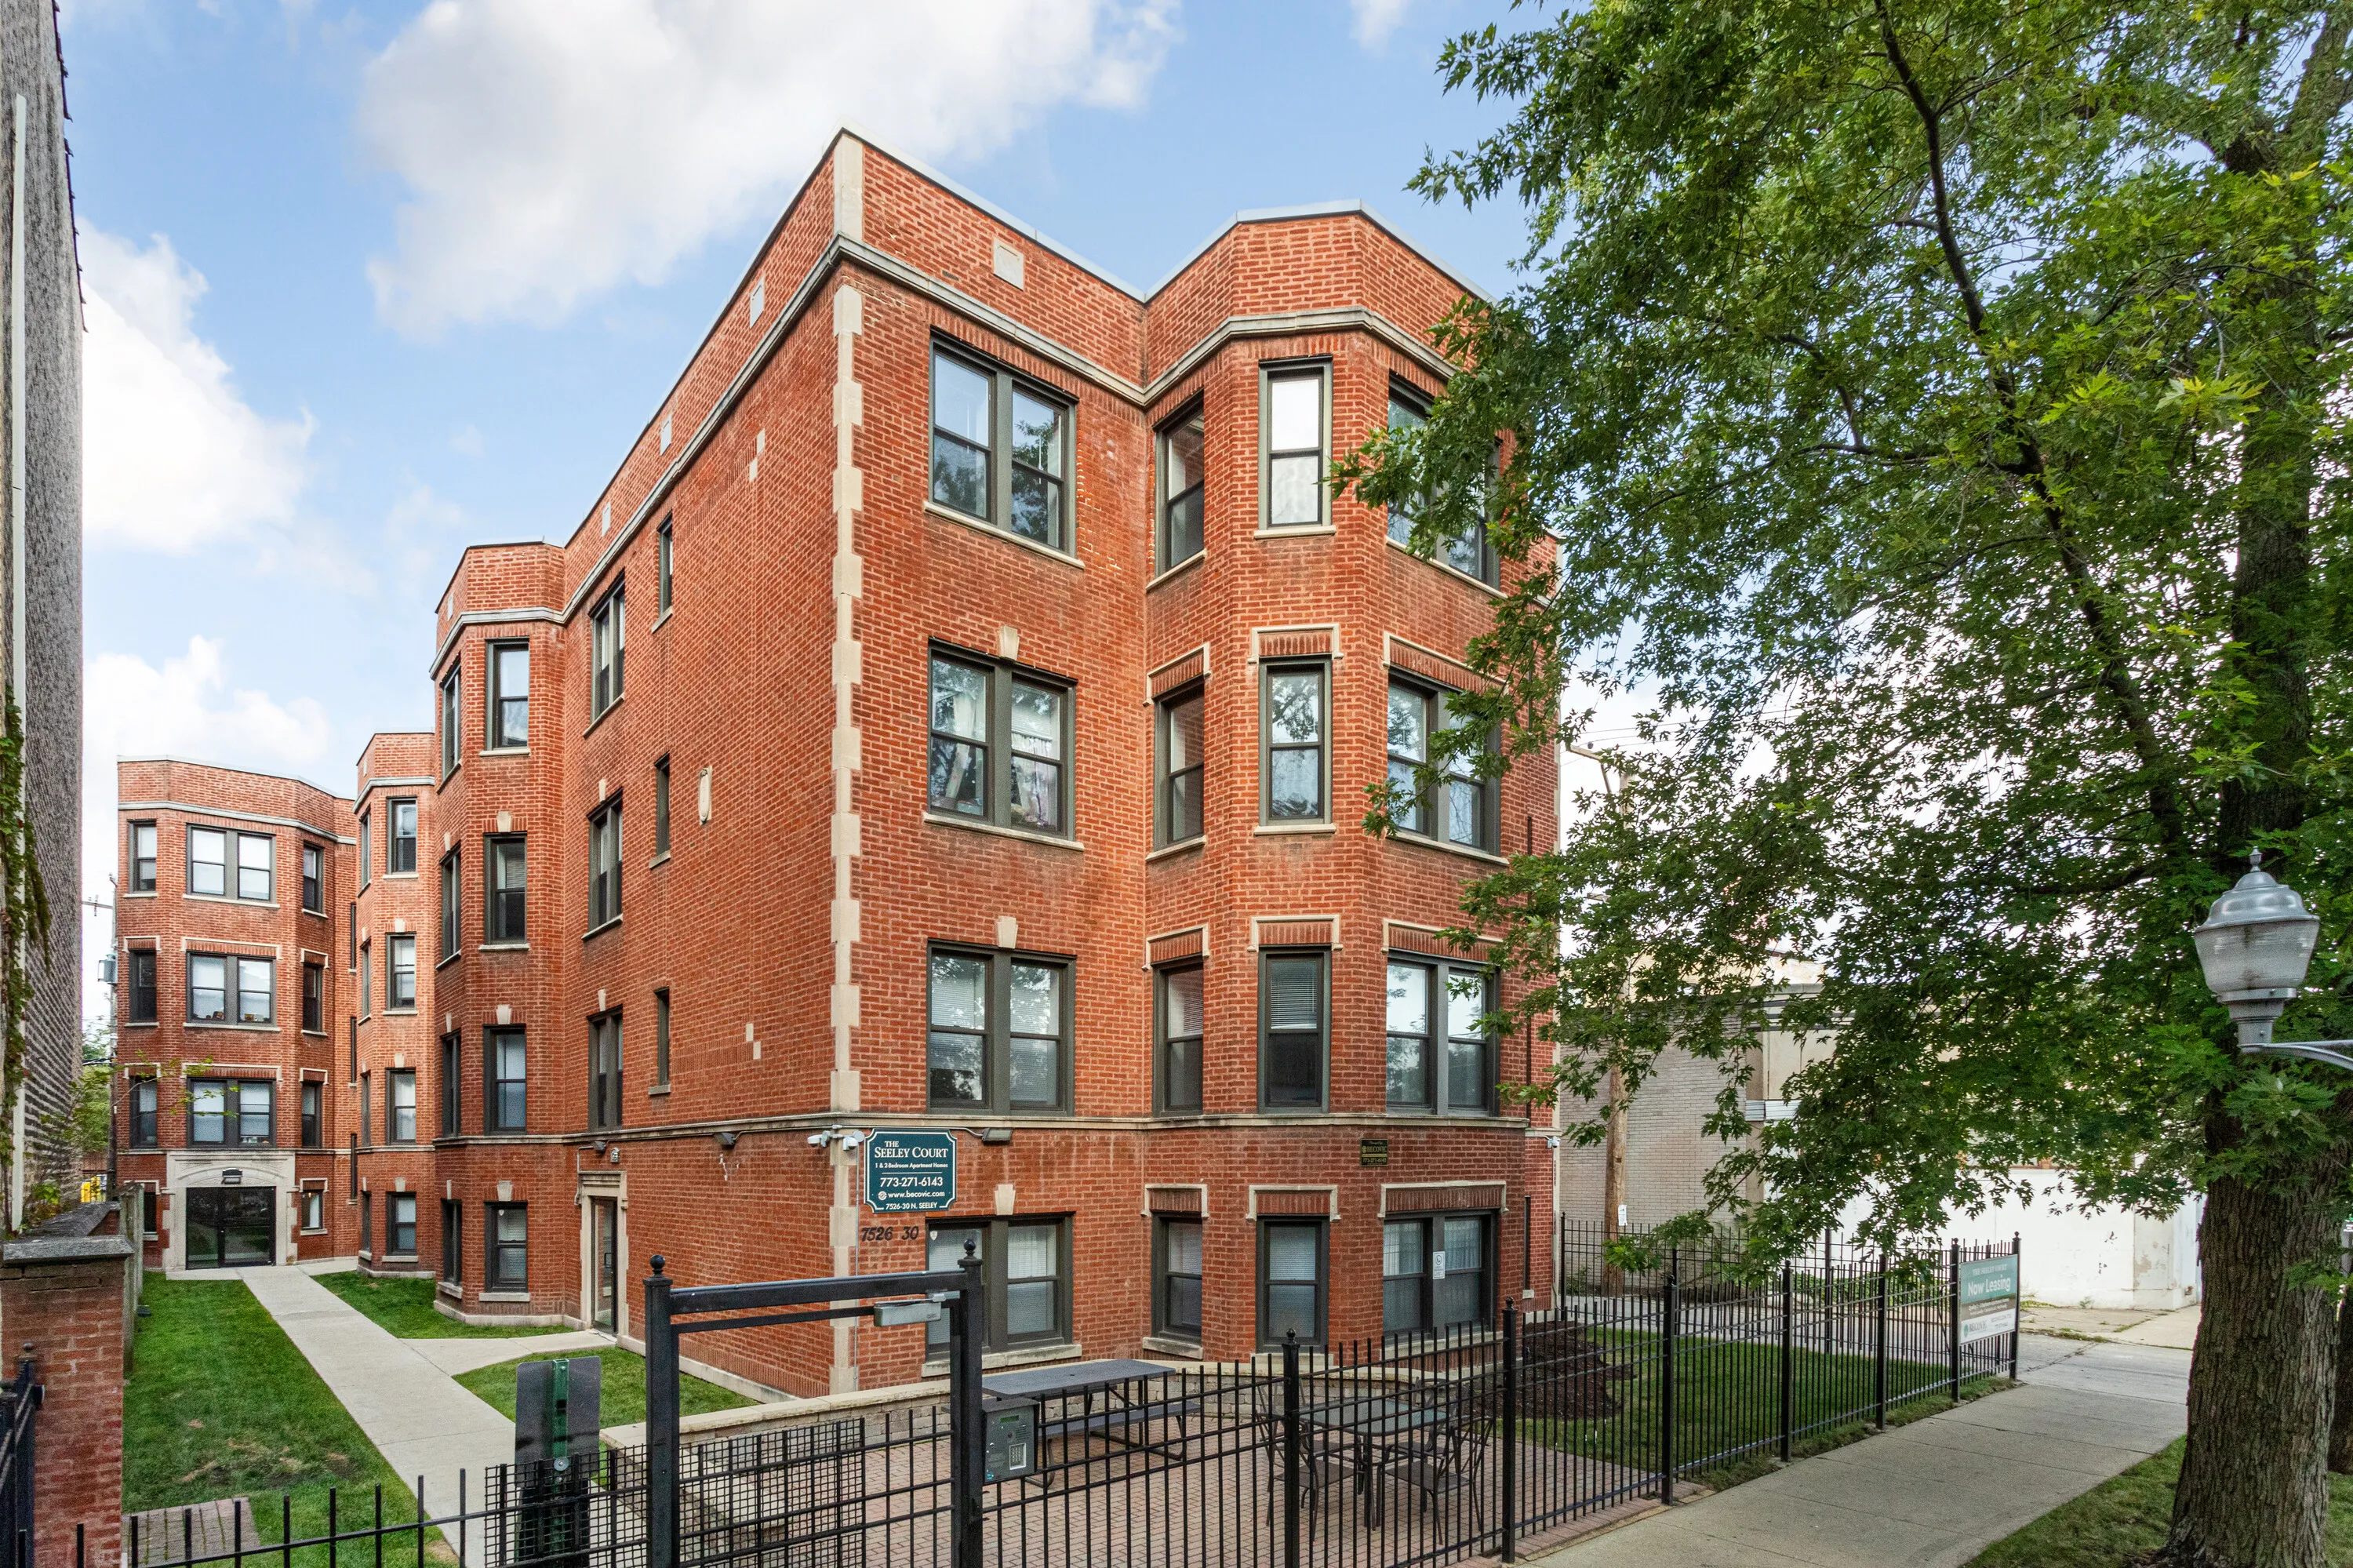 7526 N SEELEY AVE 60645-The Seeley Court-Chicago-IL